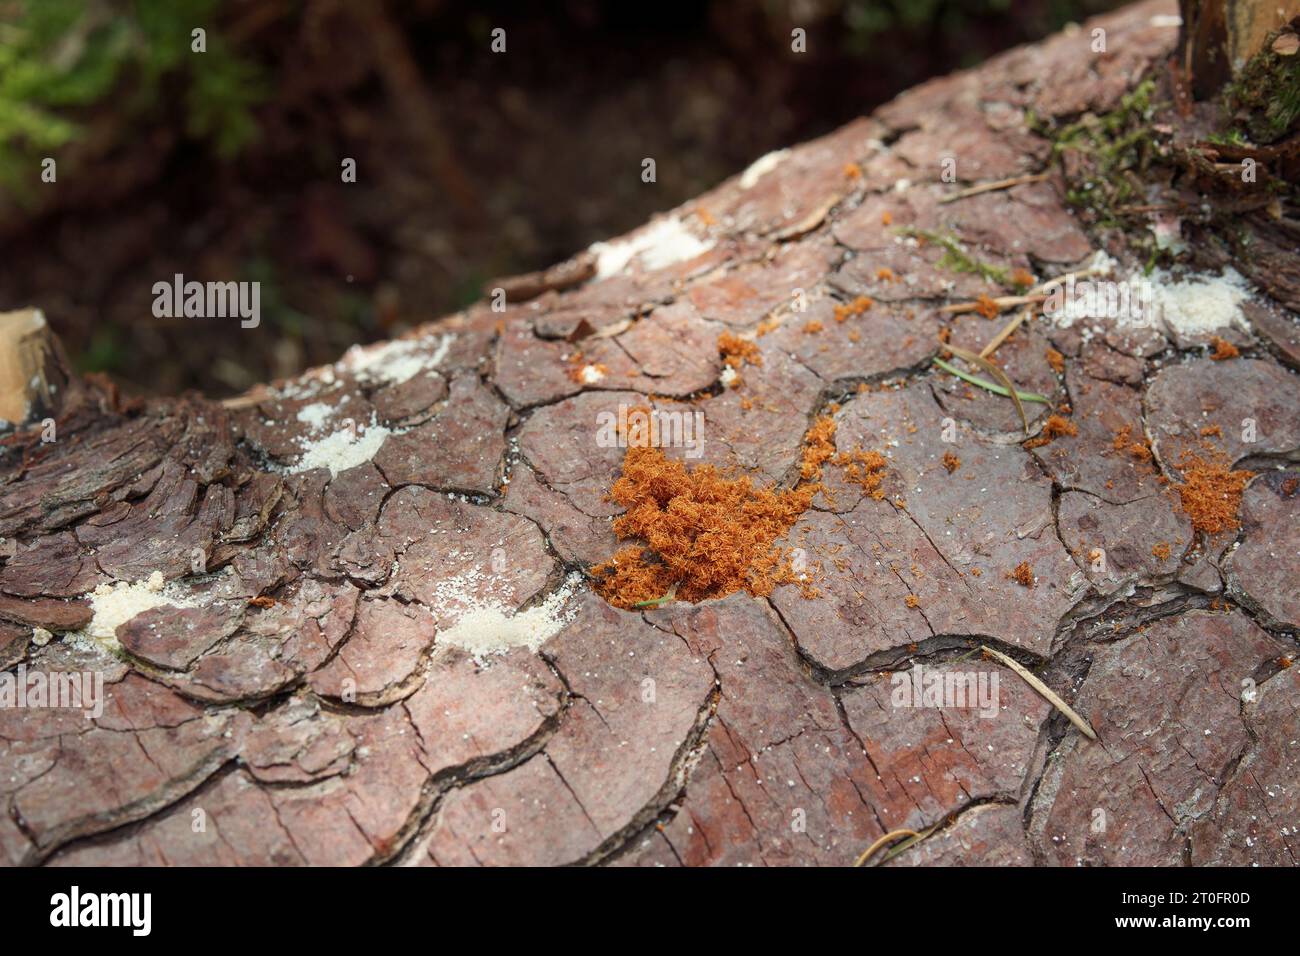 Orange and white sawdust on tree trunk from wood borer insect or bark beetle pest. Orange from Douglas fir beetle, white sawdust is from ambrosia beet Stock Photo